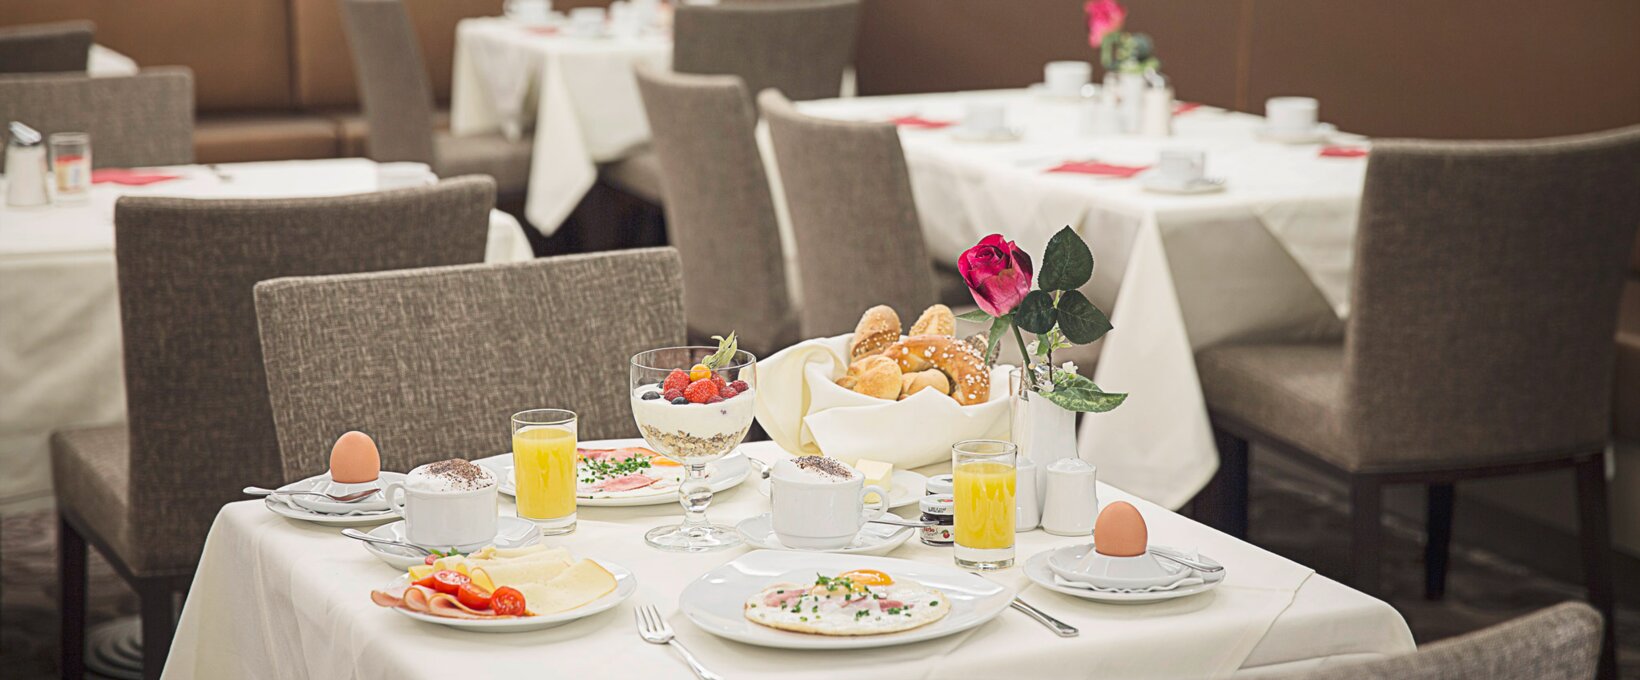 Breakfast table with egg and buns | Hotel Schillerpark in Linz